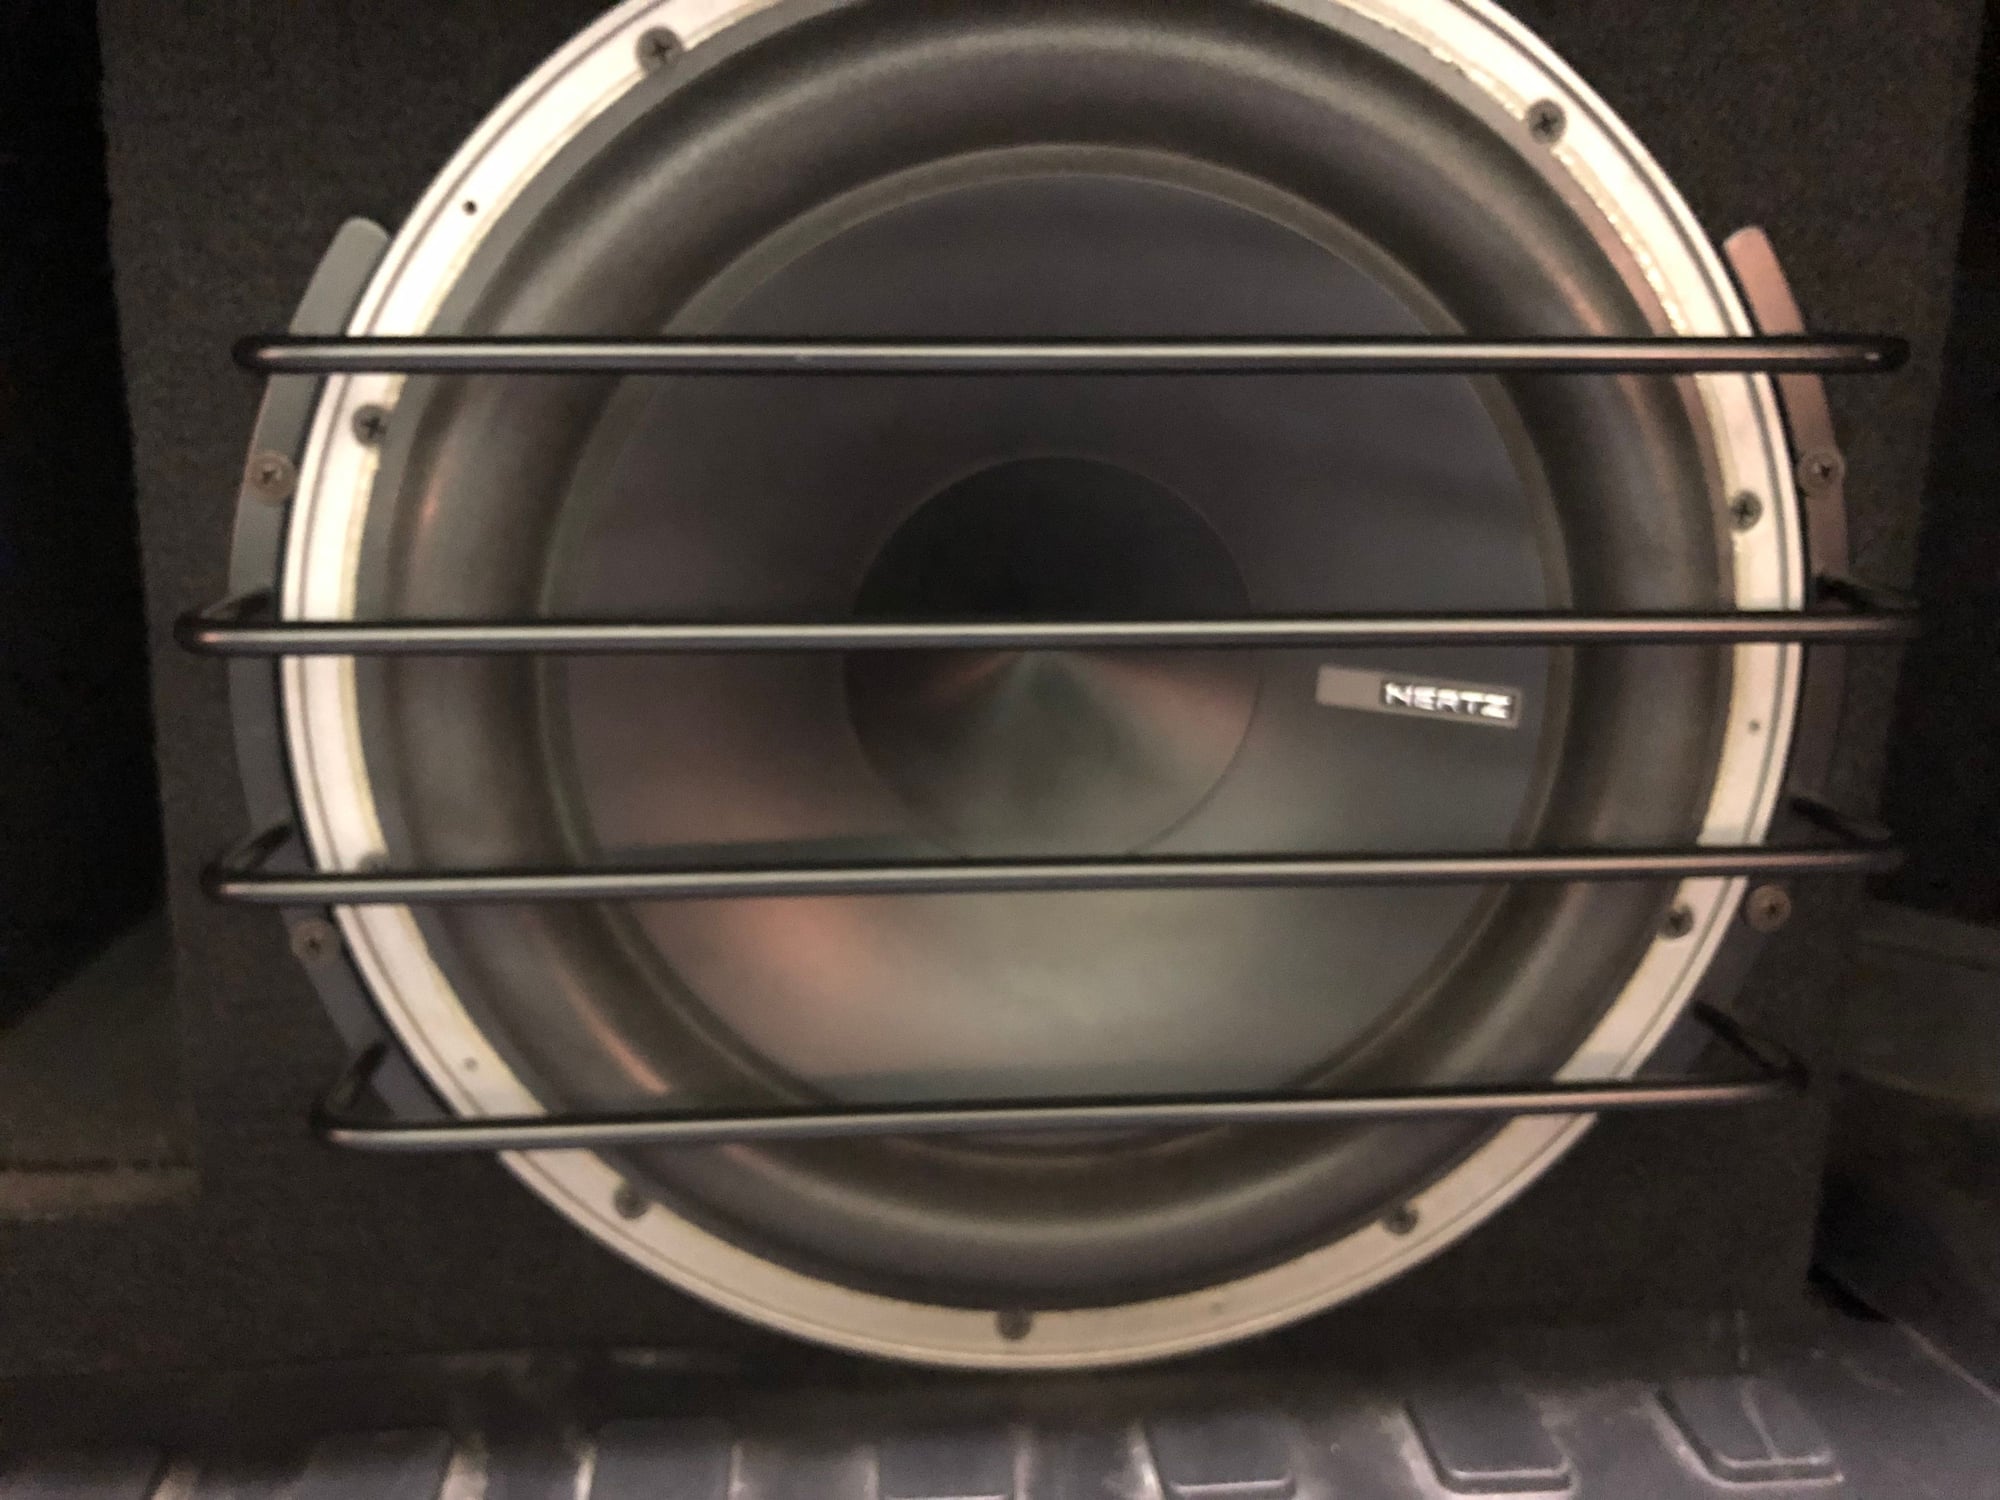 Audio Video/Electronics - HERTZ 12" Subwoofers and HERTZ HDP-1 Amp - Used - 2010 to 2014 Mercedes-Benz E350 - Chicago, IL 60638, United States